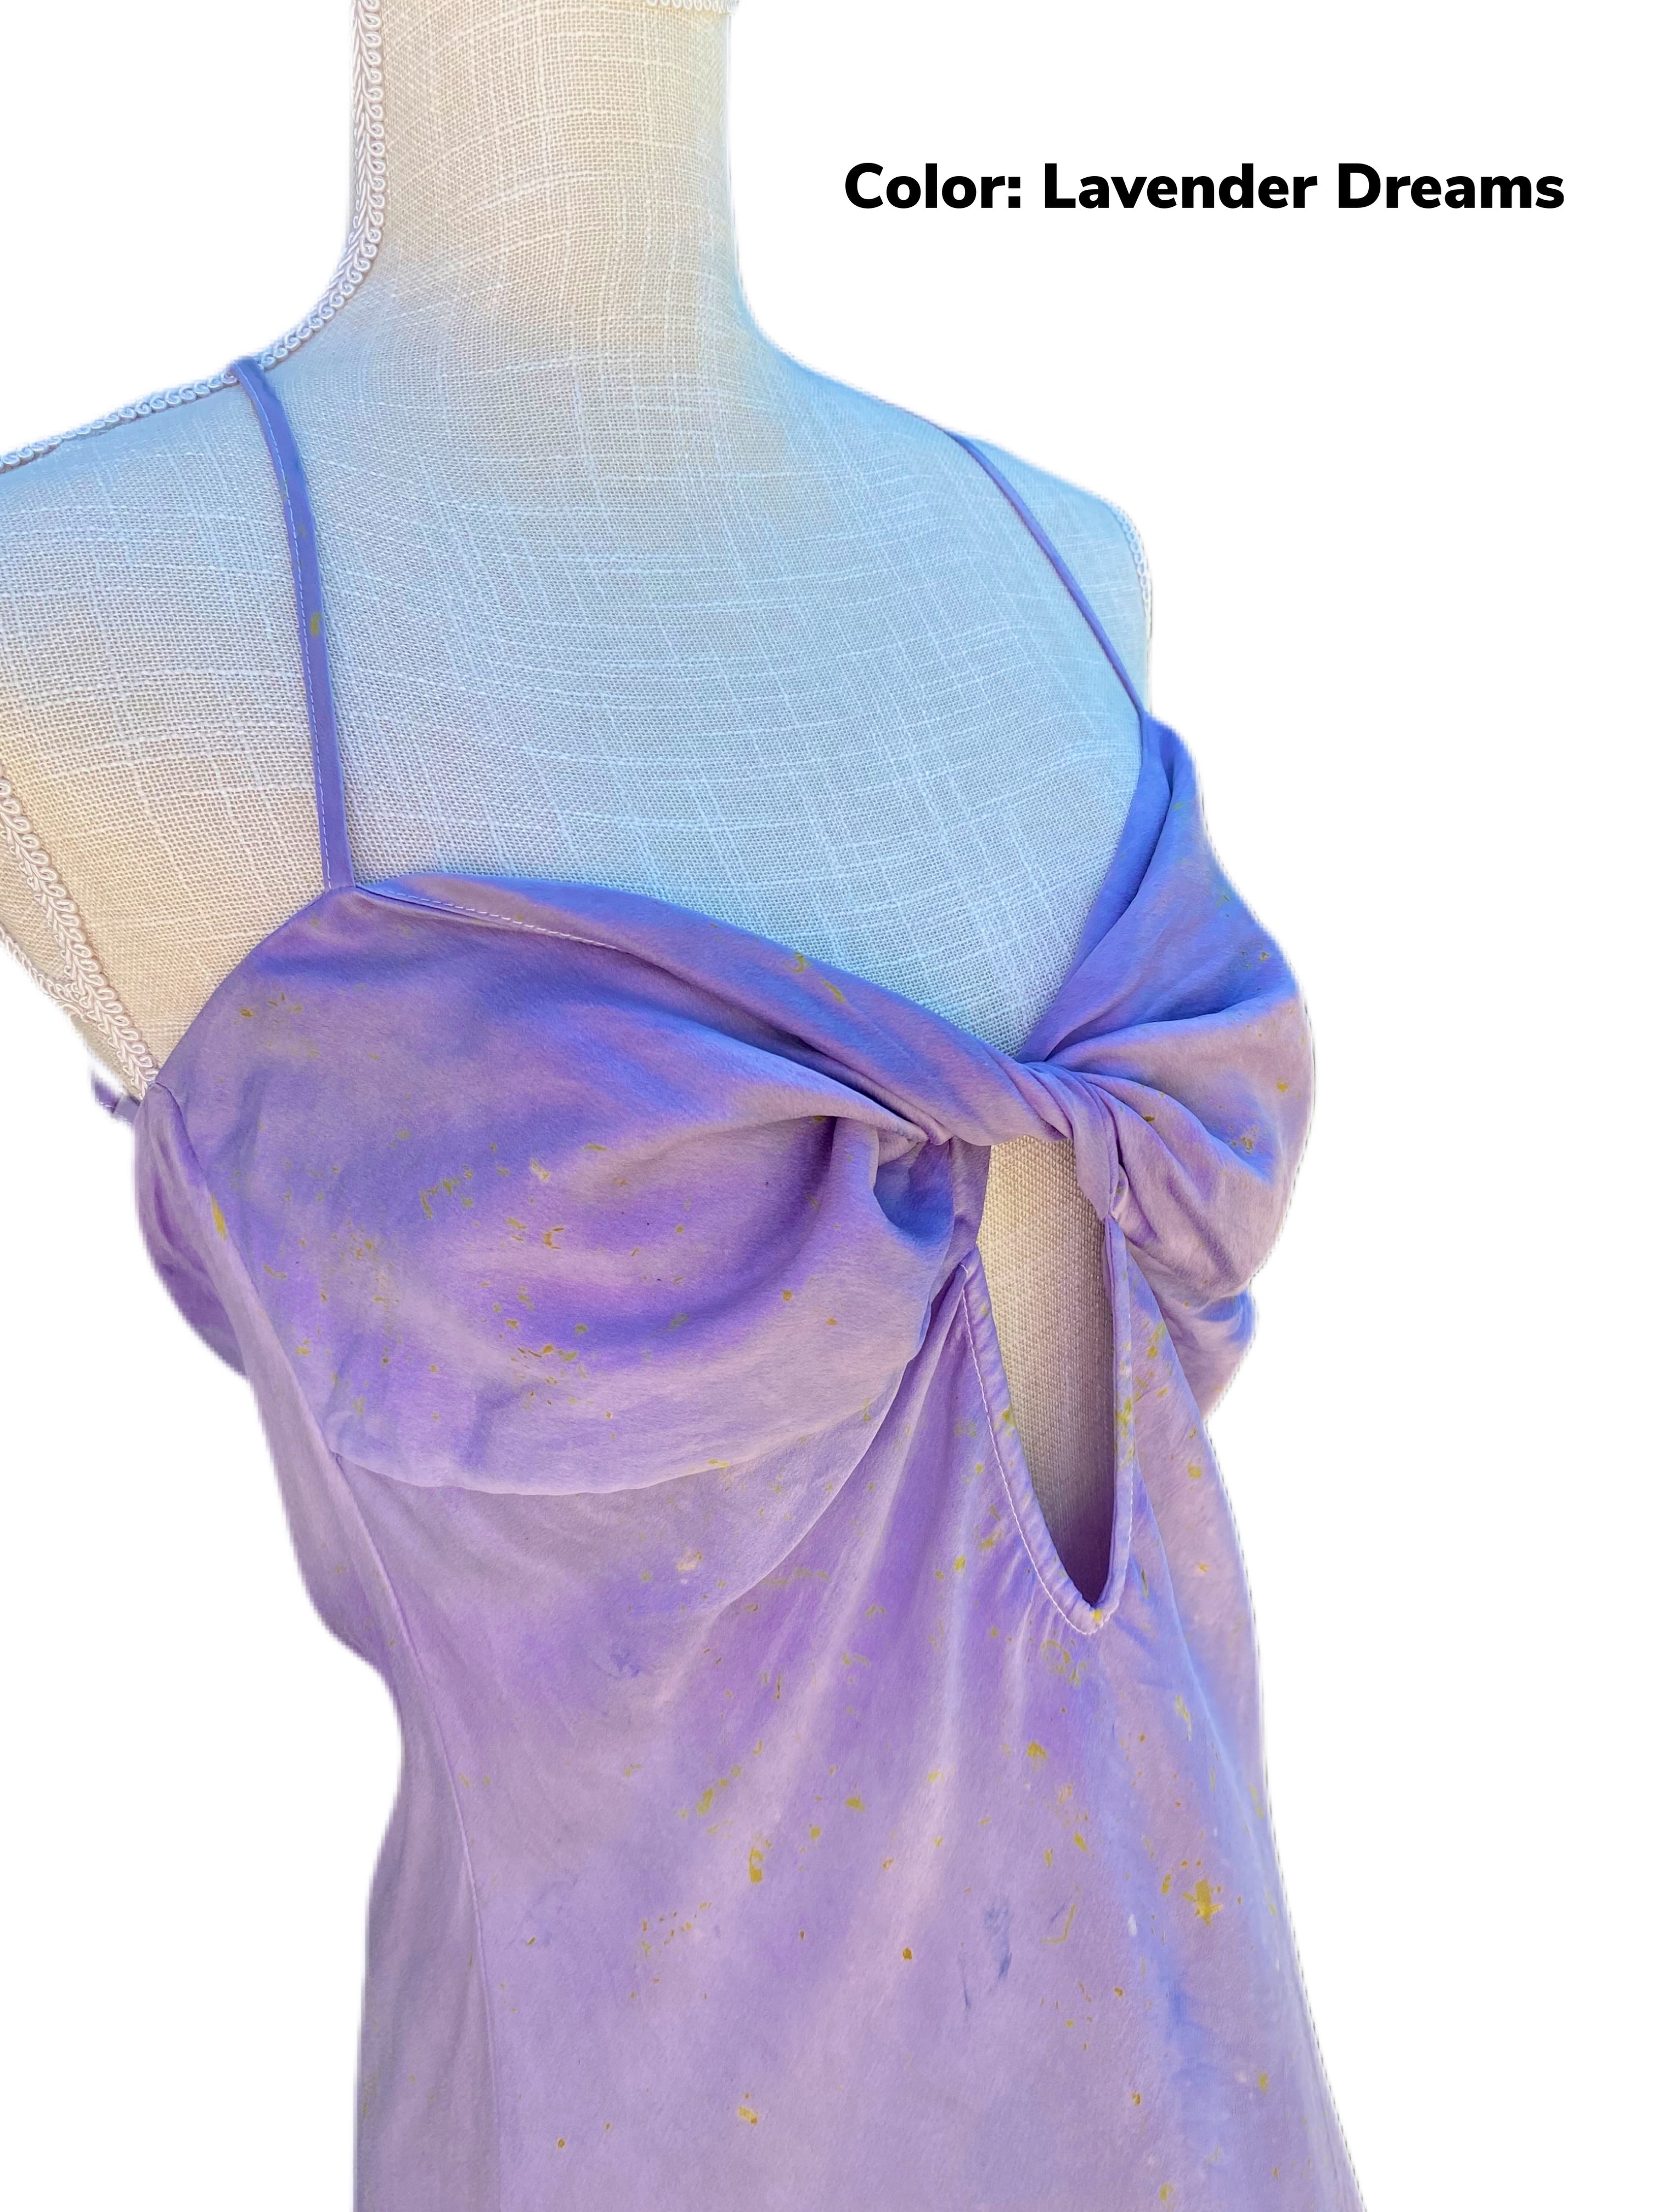 Wild Orchid Plant Dyed Silk Slip